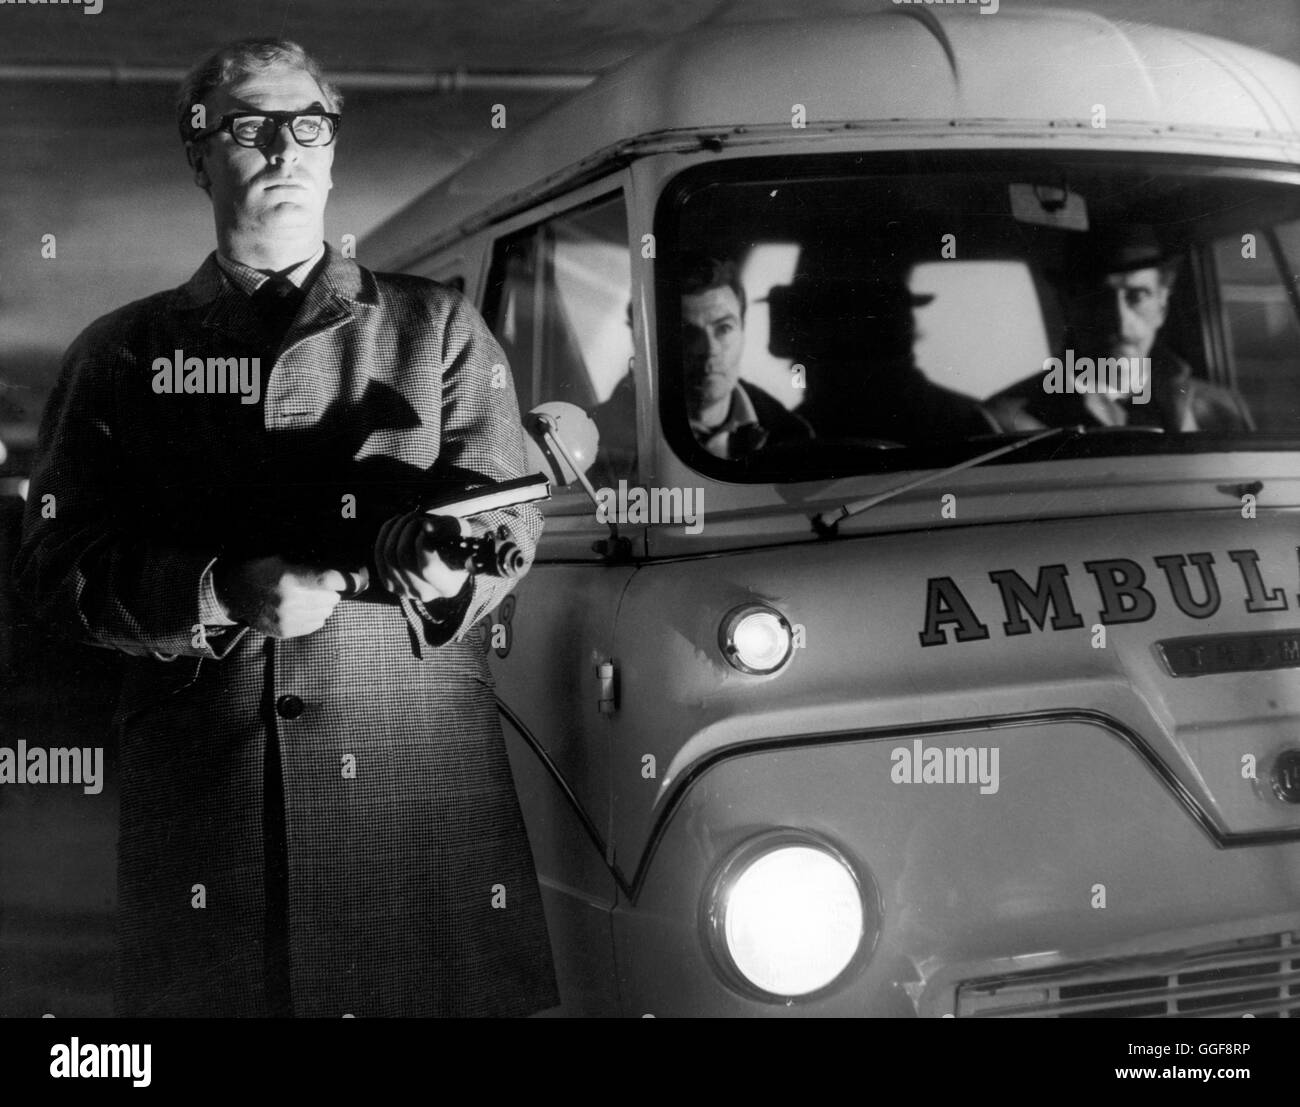 IPCRESS - STRENG GEHEIM / The Ipress File GB 1965 / Sidney J. Furie MICHAEL CAINE (Harry Palmer) in 'Ipcress - streng geheim', 1965.  Regie: Sidney J. Furie aka. The Ipress File Stock Photo